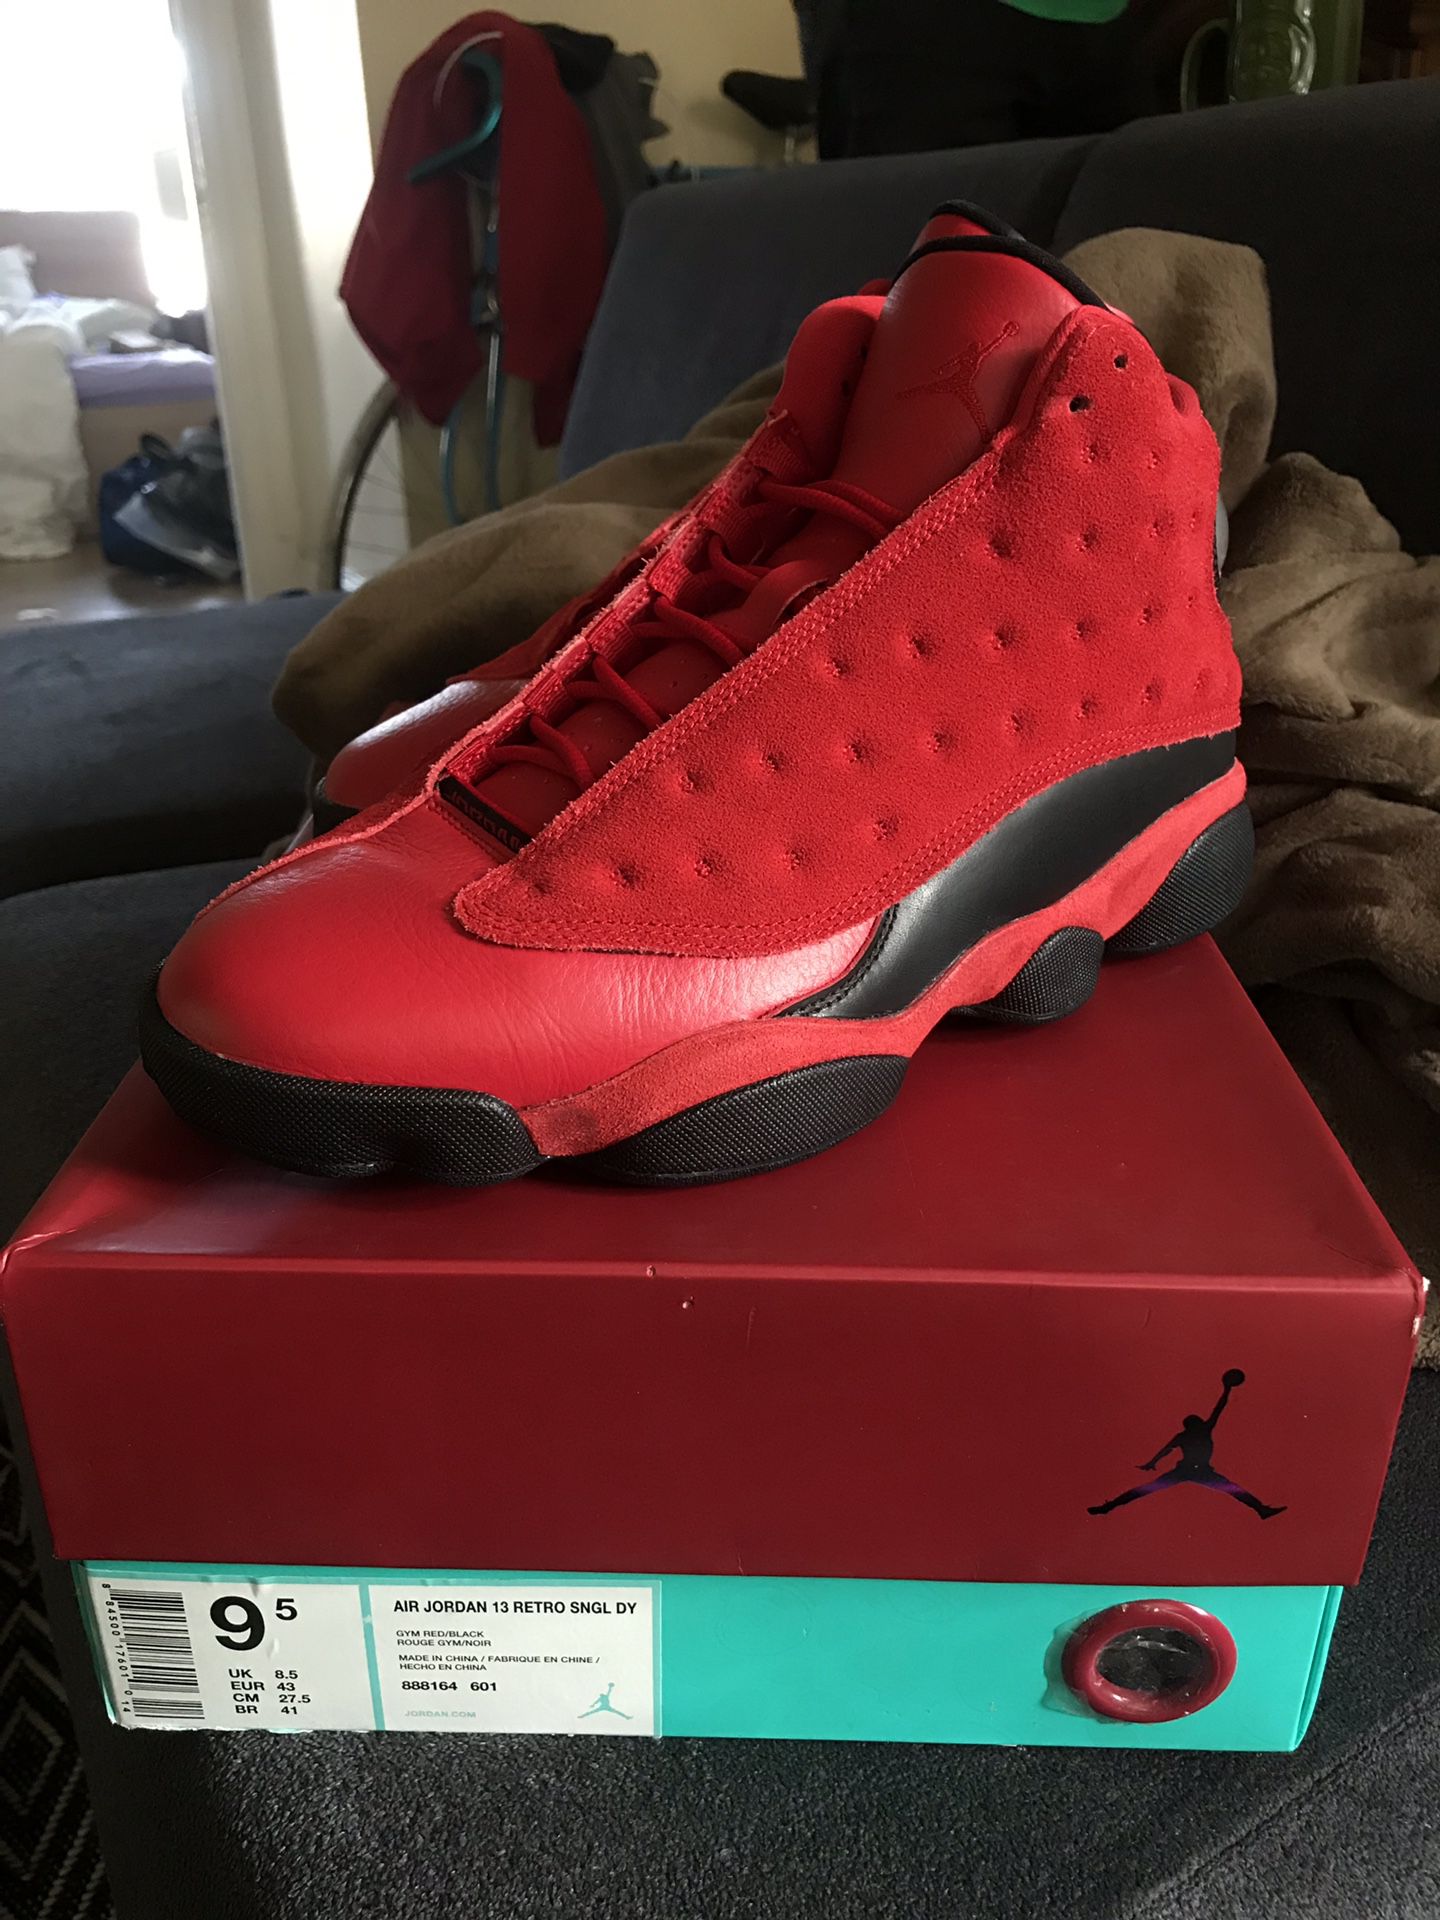 Singles Day 13s size 9.5 great condition